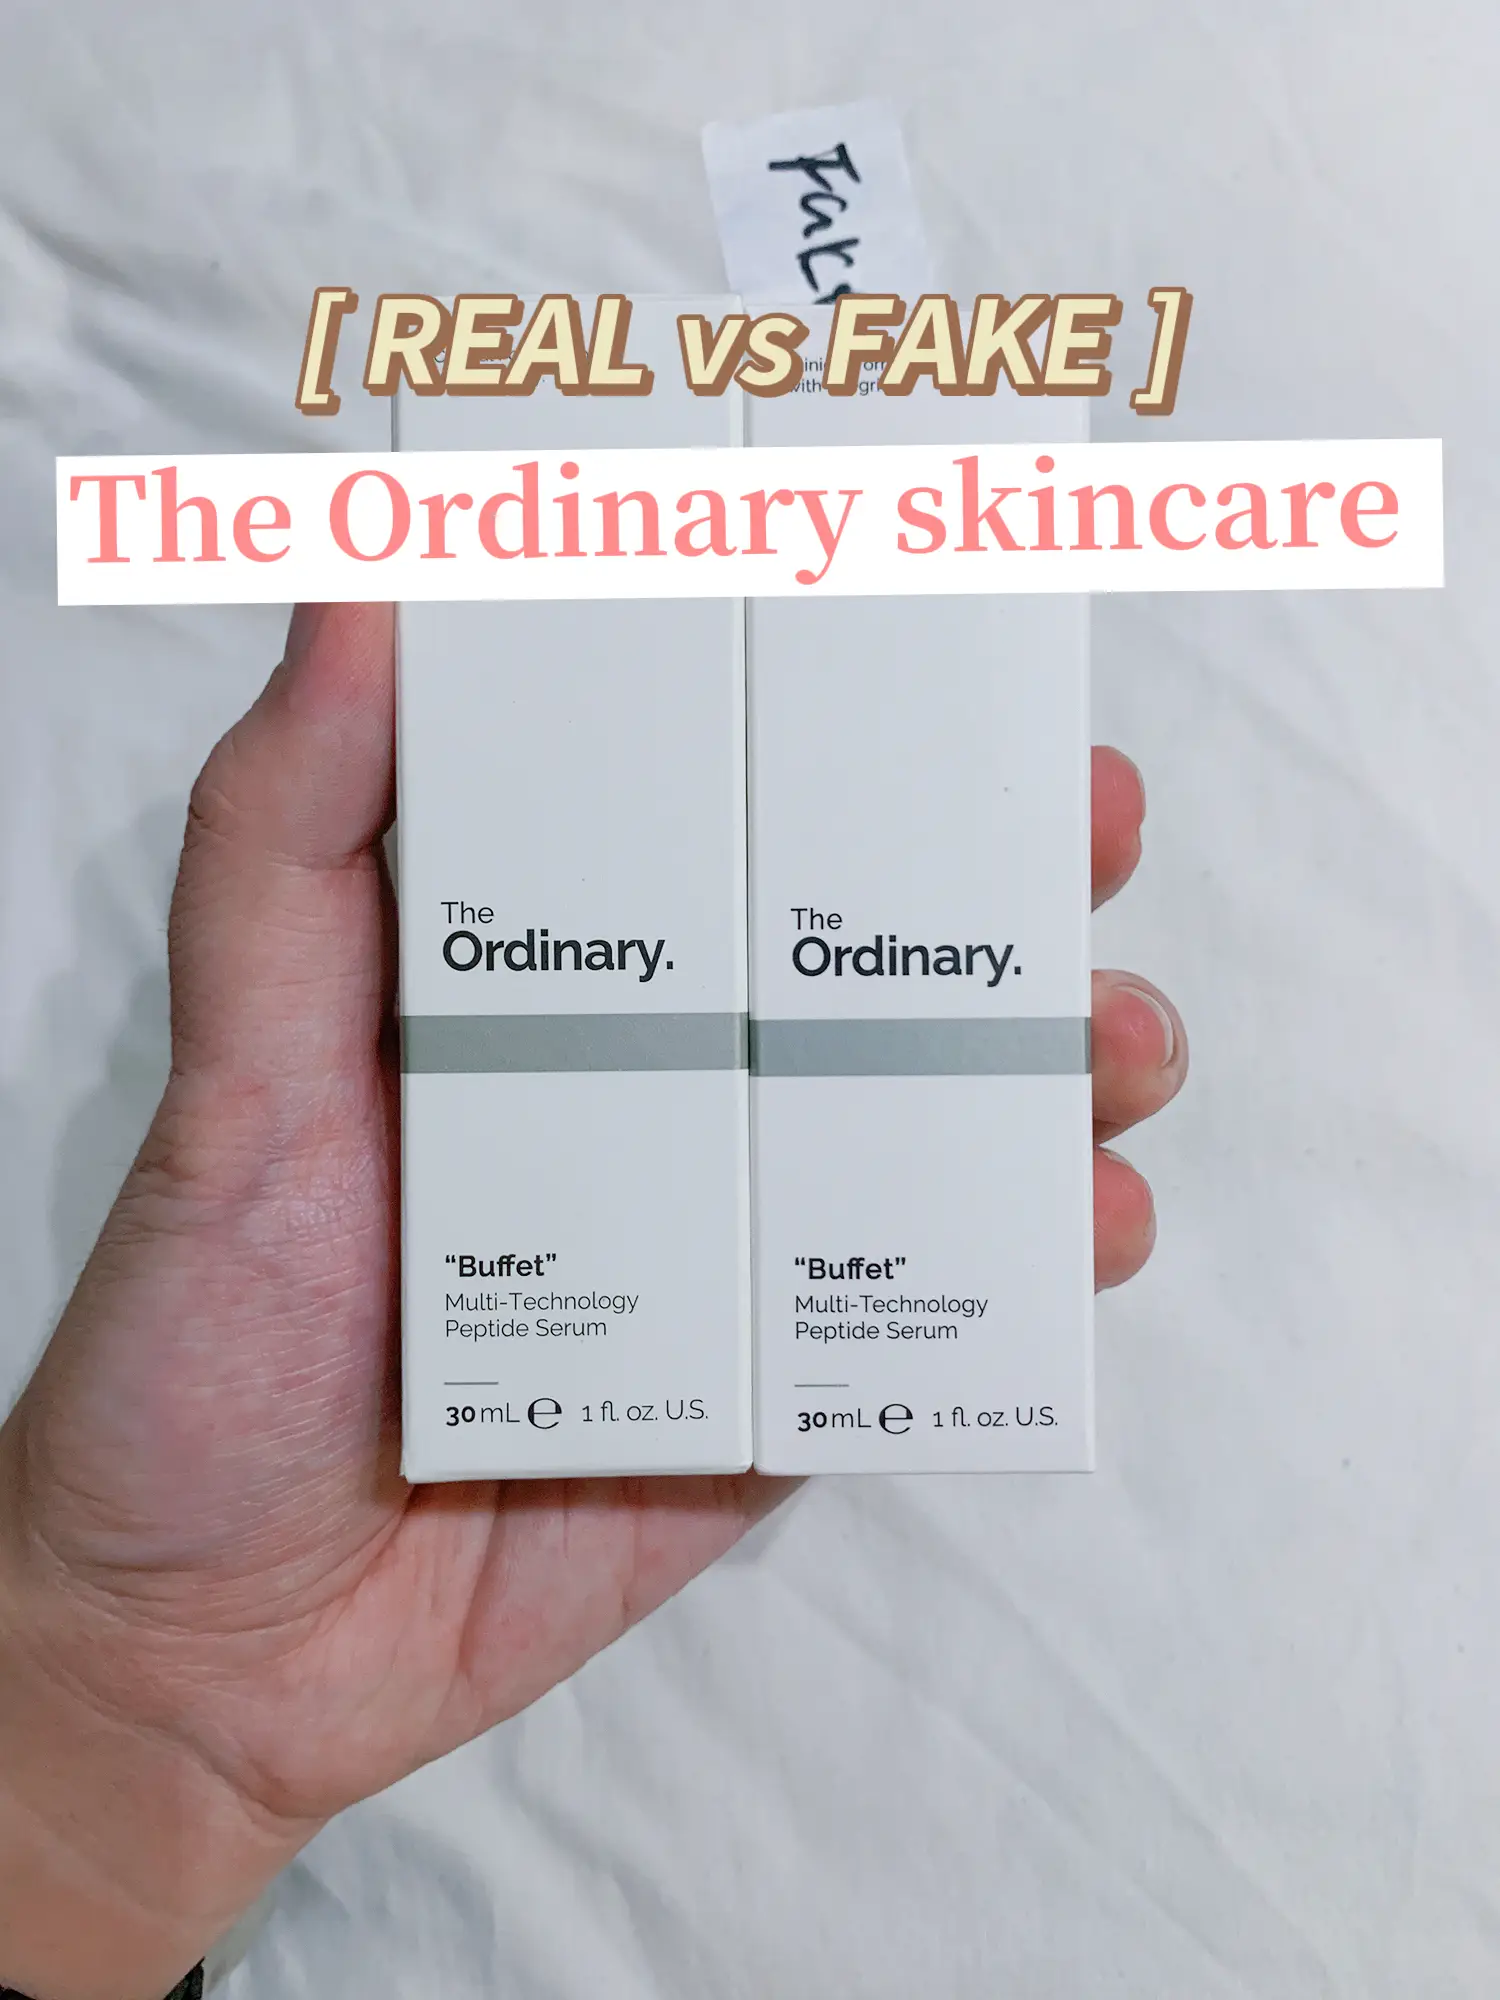 Fake vs Original, how to tell the difference